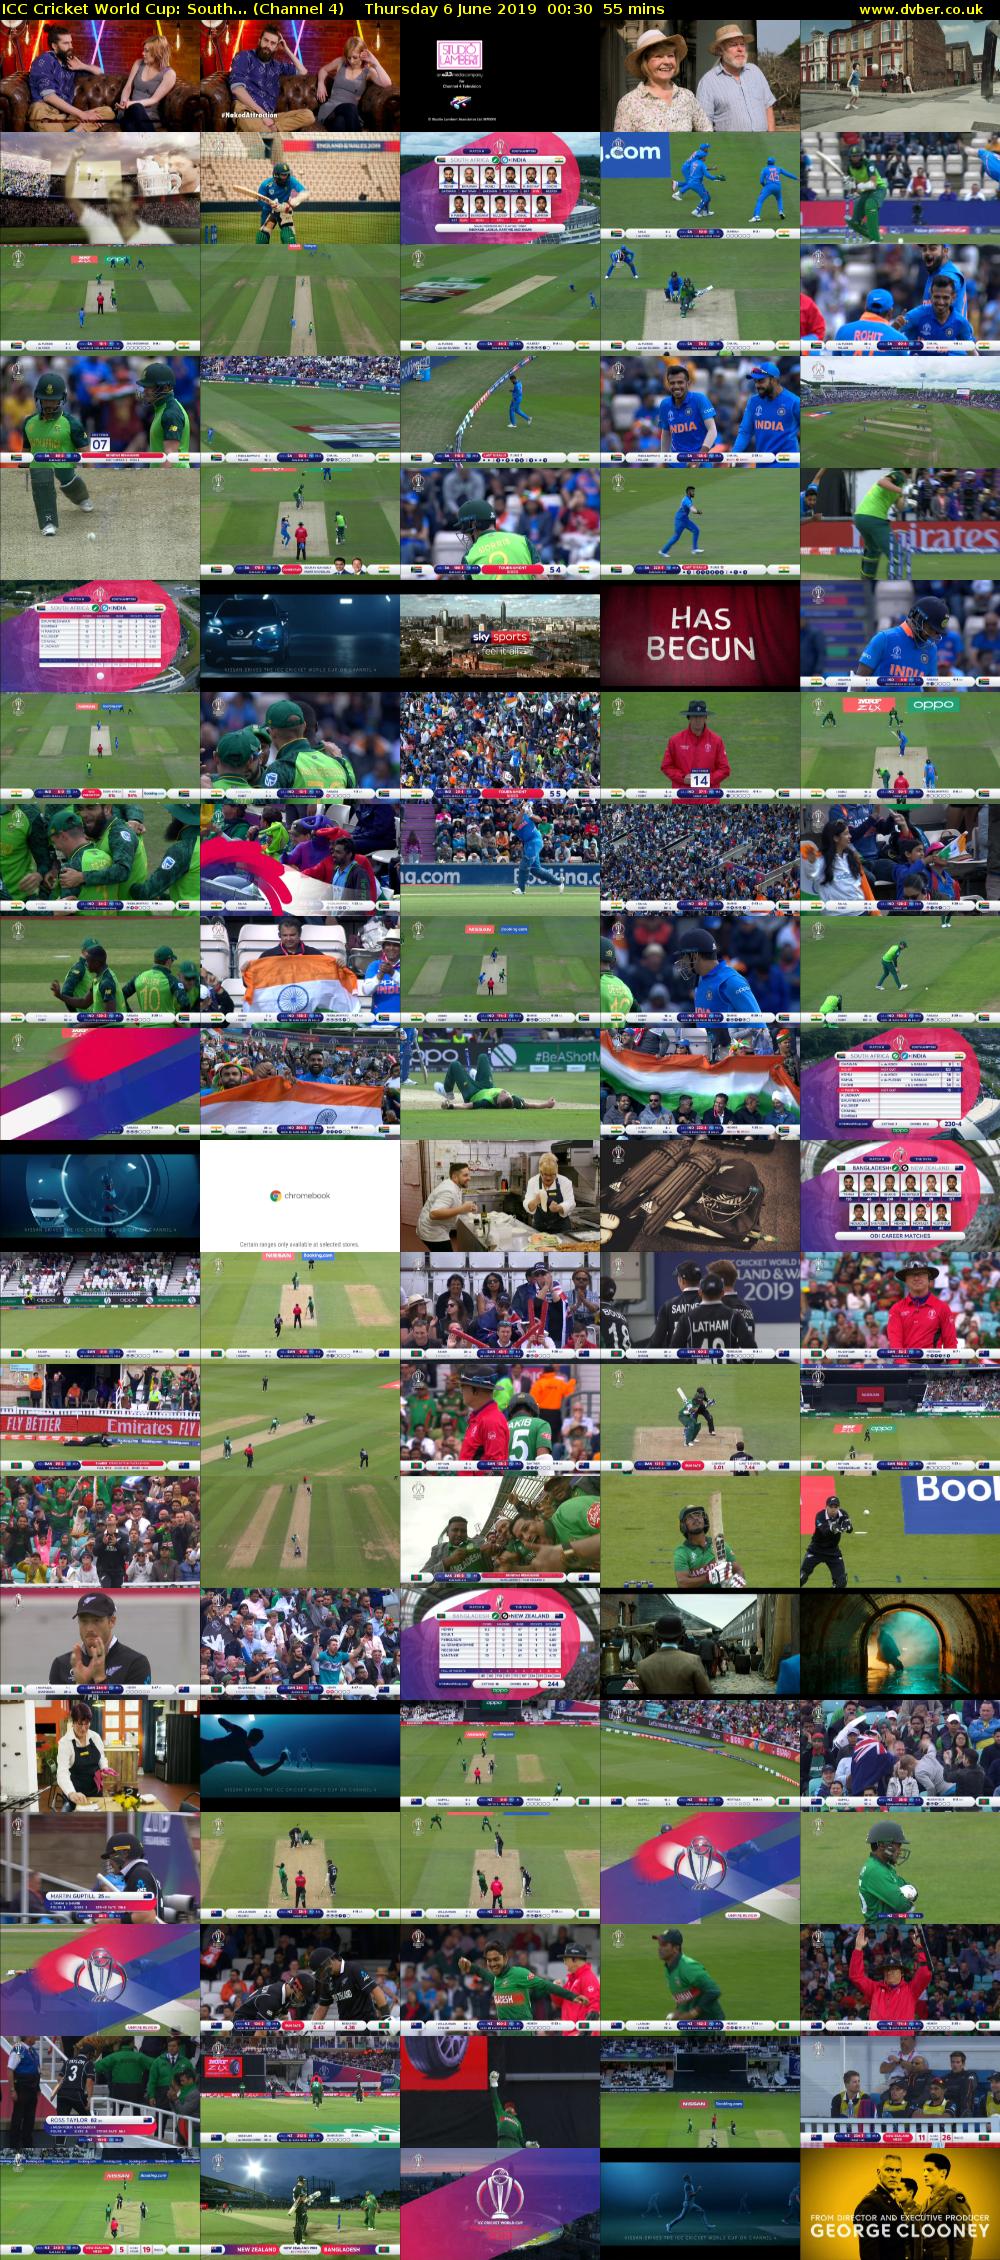 ICC Cricket World Cup: South... (Channel 4) Thursday 6 June 2019 00:30 - 01:25